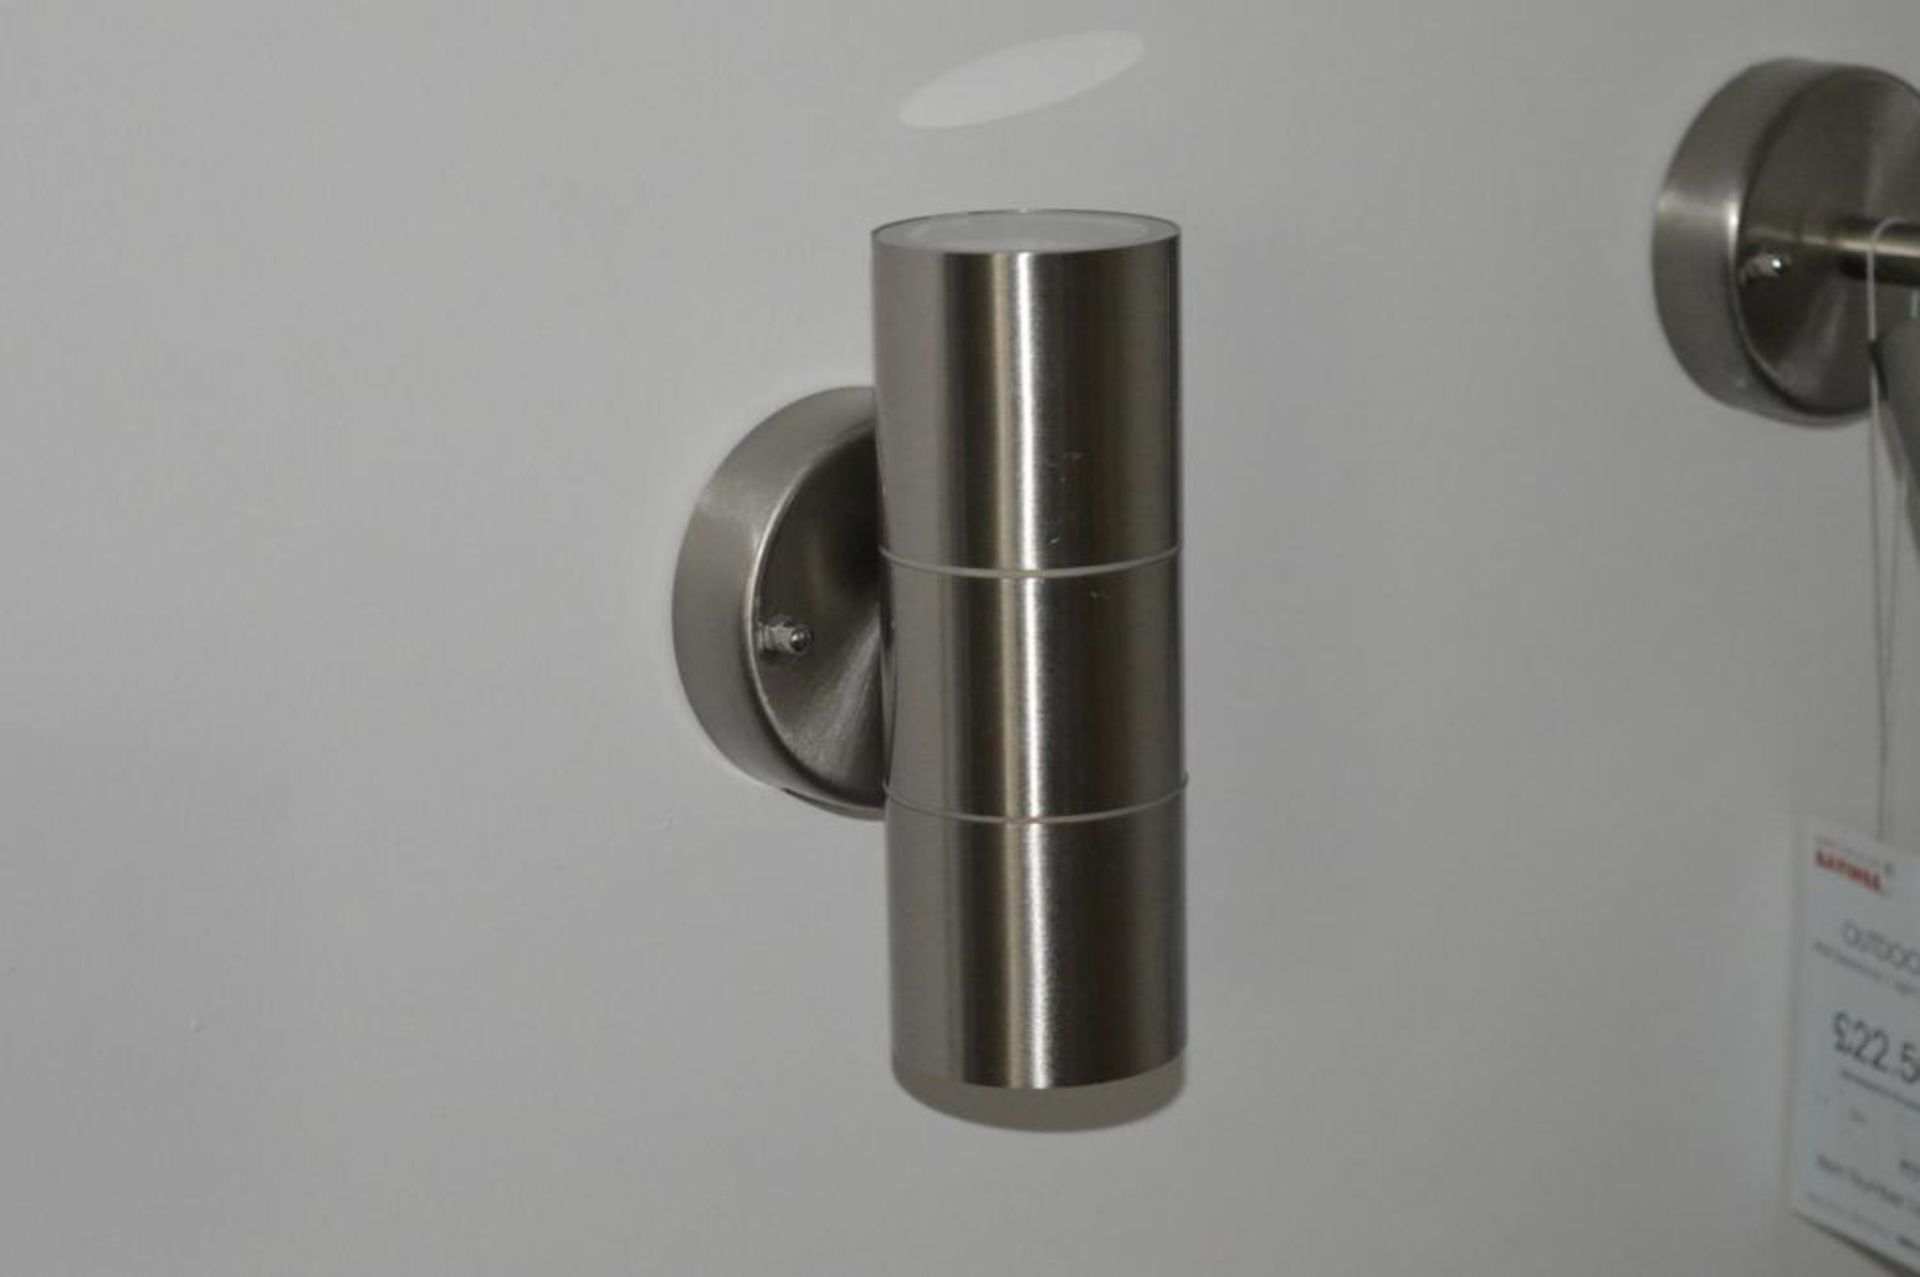 1 x Outdoor Directional Wall Light And A 2 Light Wall Bracket Finished In Stainless Steel - Ex Displ - Image 6 of 6